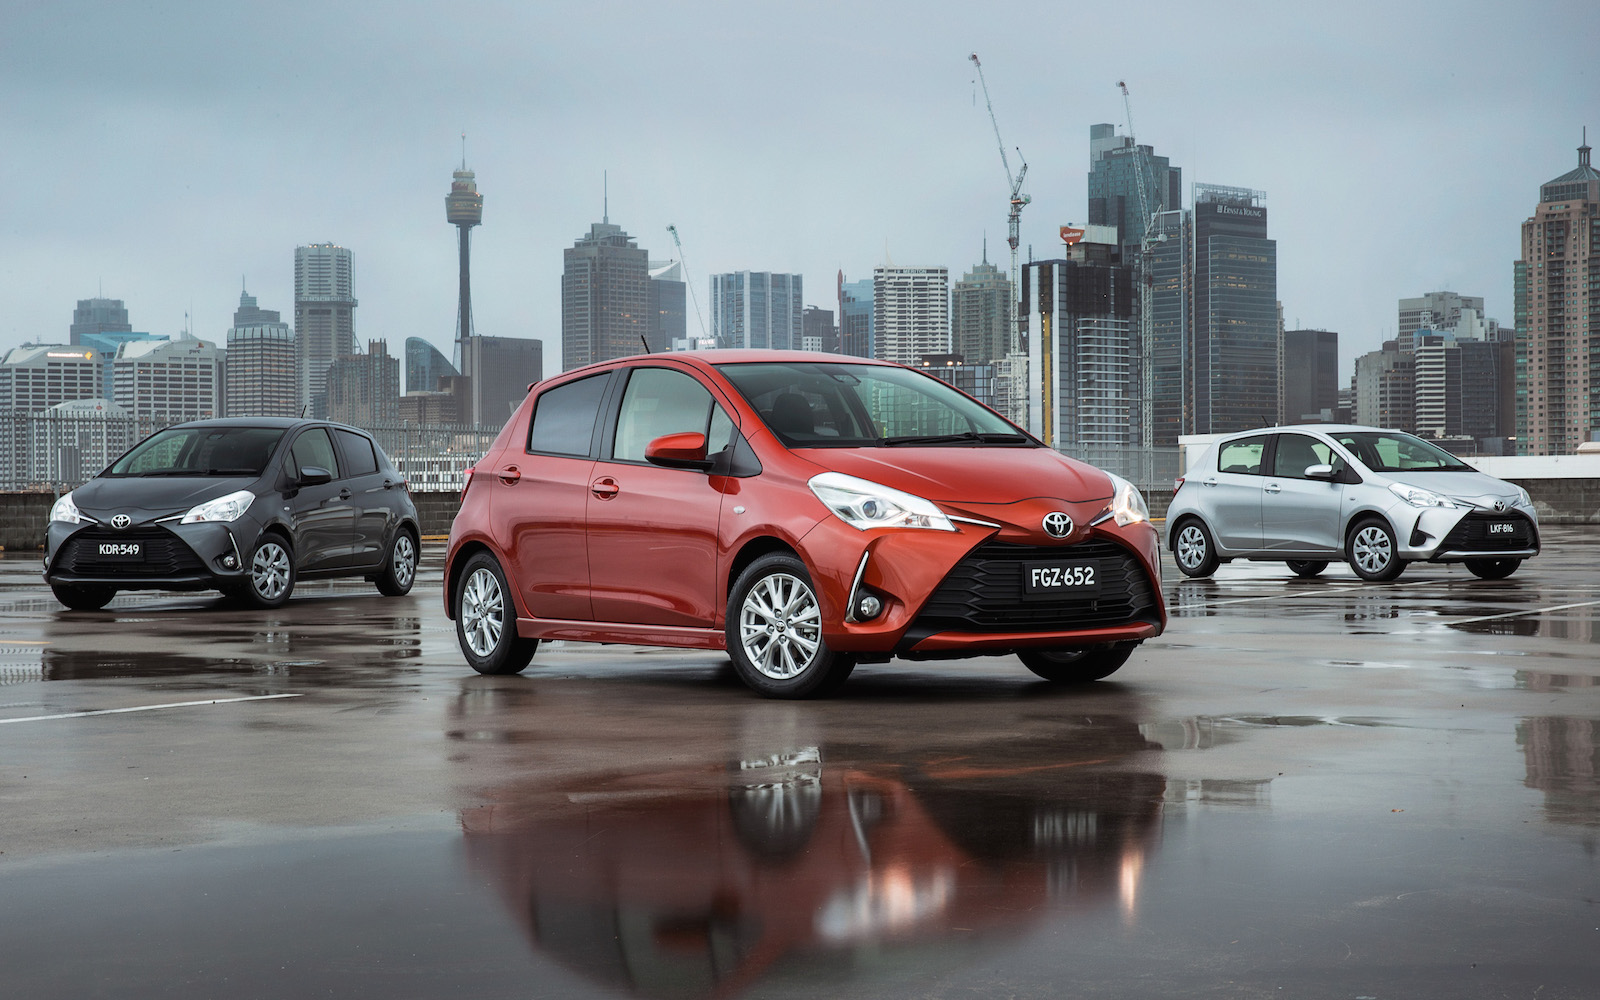 2017 Toyota Yaris now on sale in Australia from $15,290